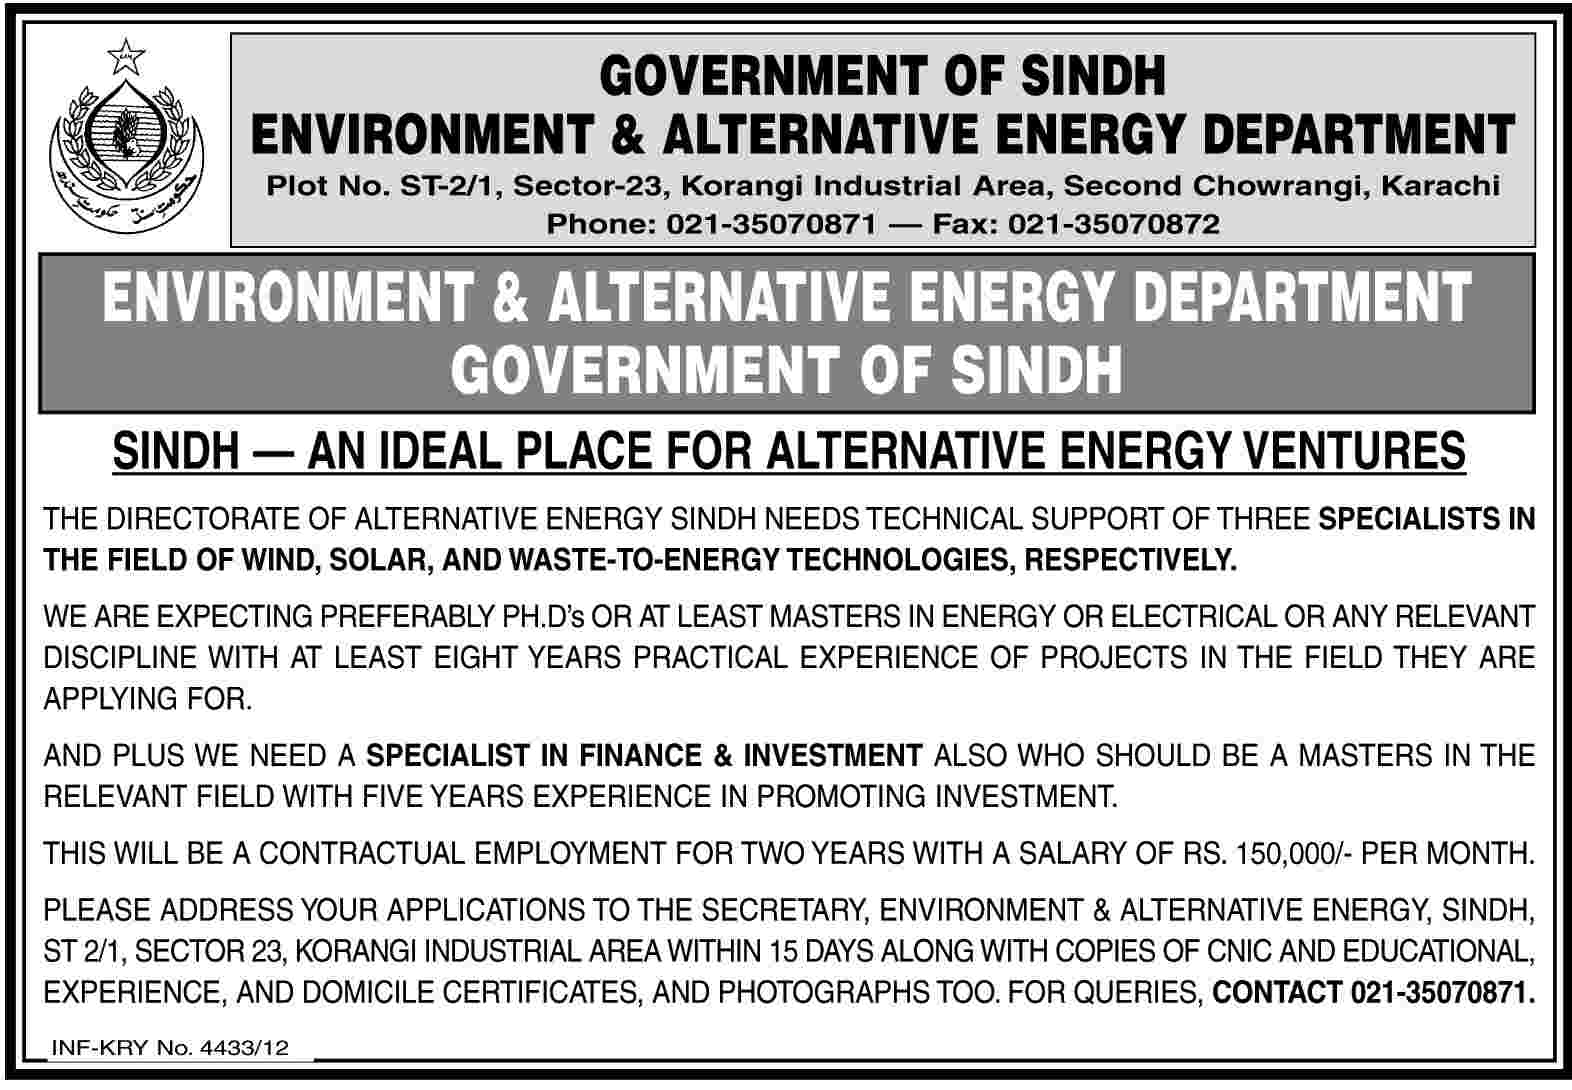 Sindh Environment & Alternative Energy Department Jobs for Technology & Finance Specialists